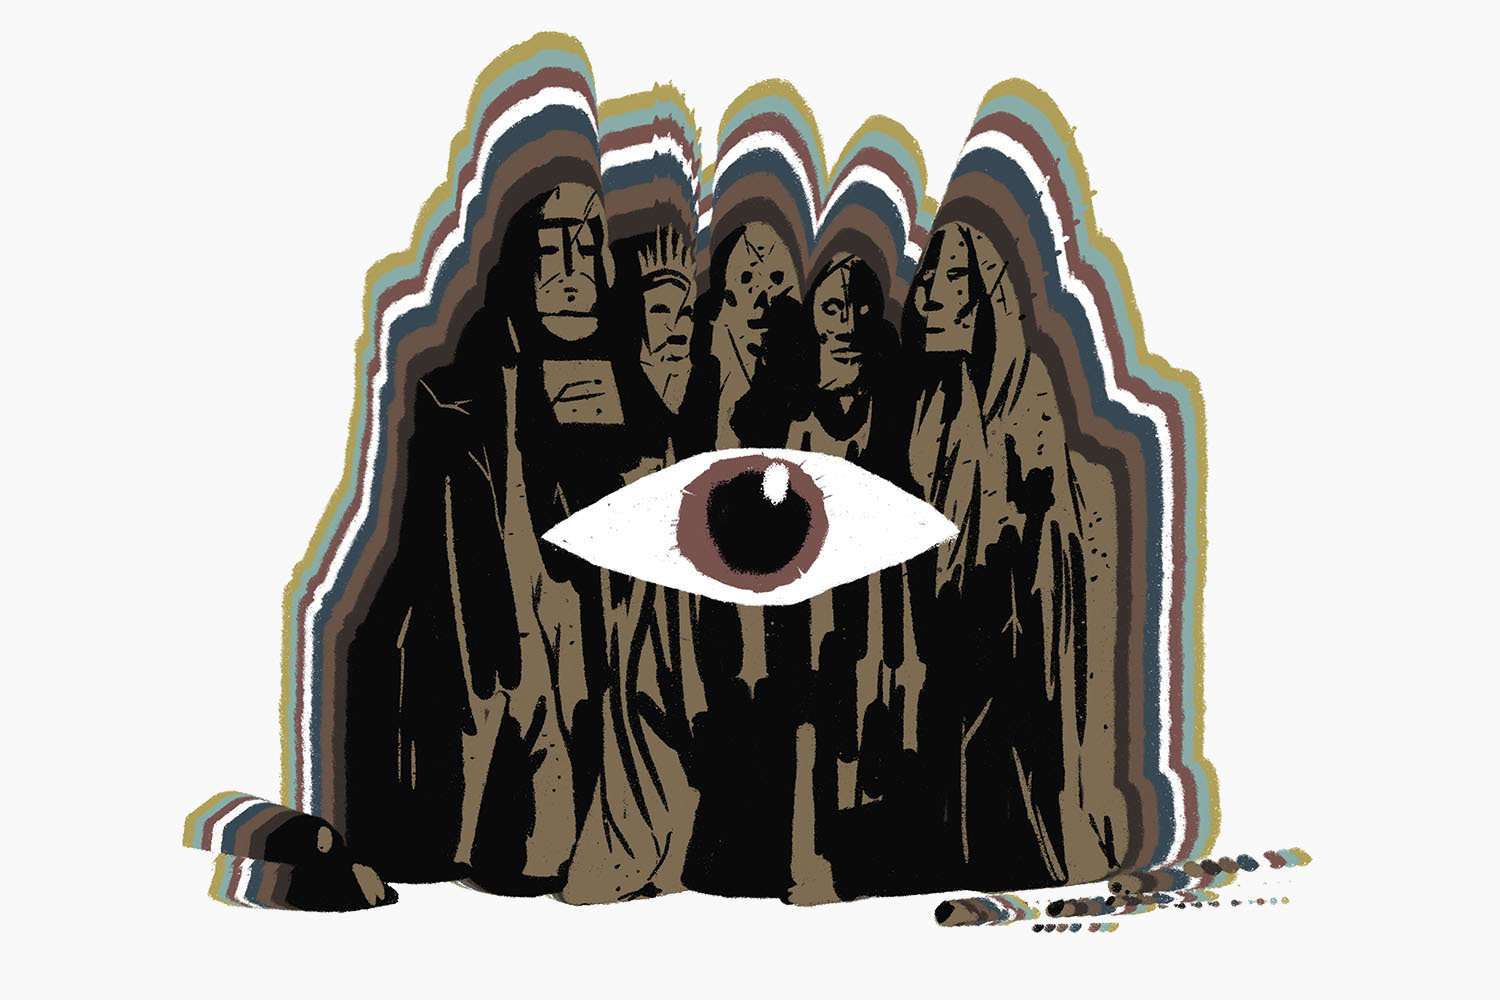 an illustration of five cloaked figures huddled together, presumably as part of some men's group ritual